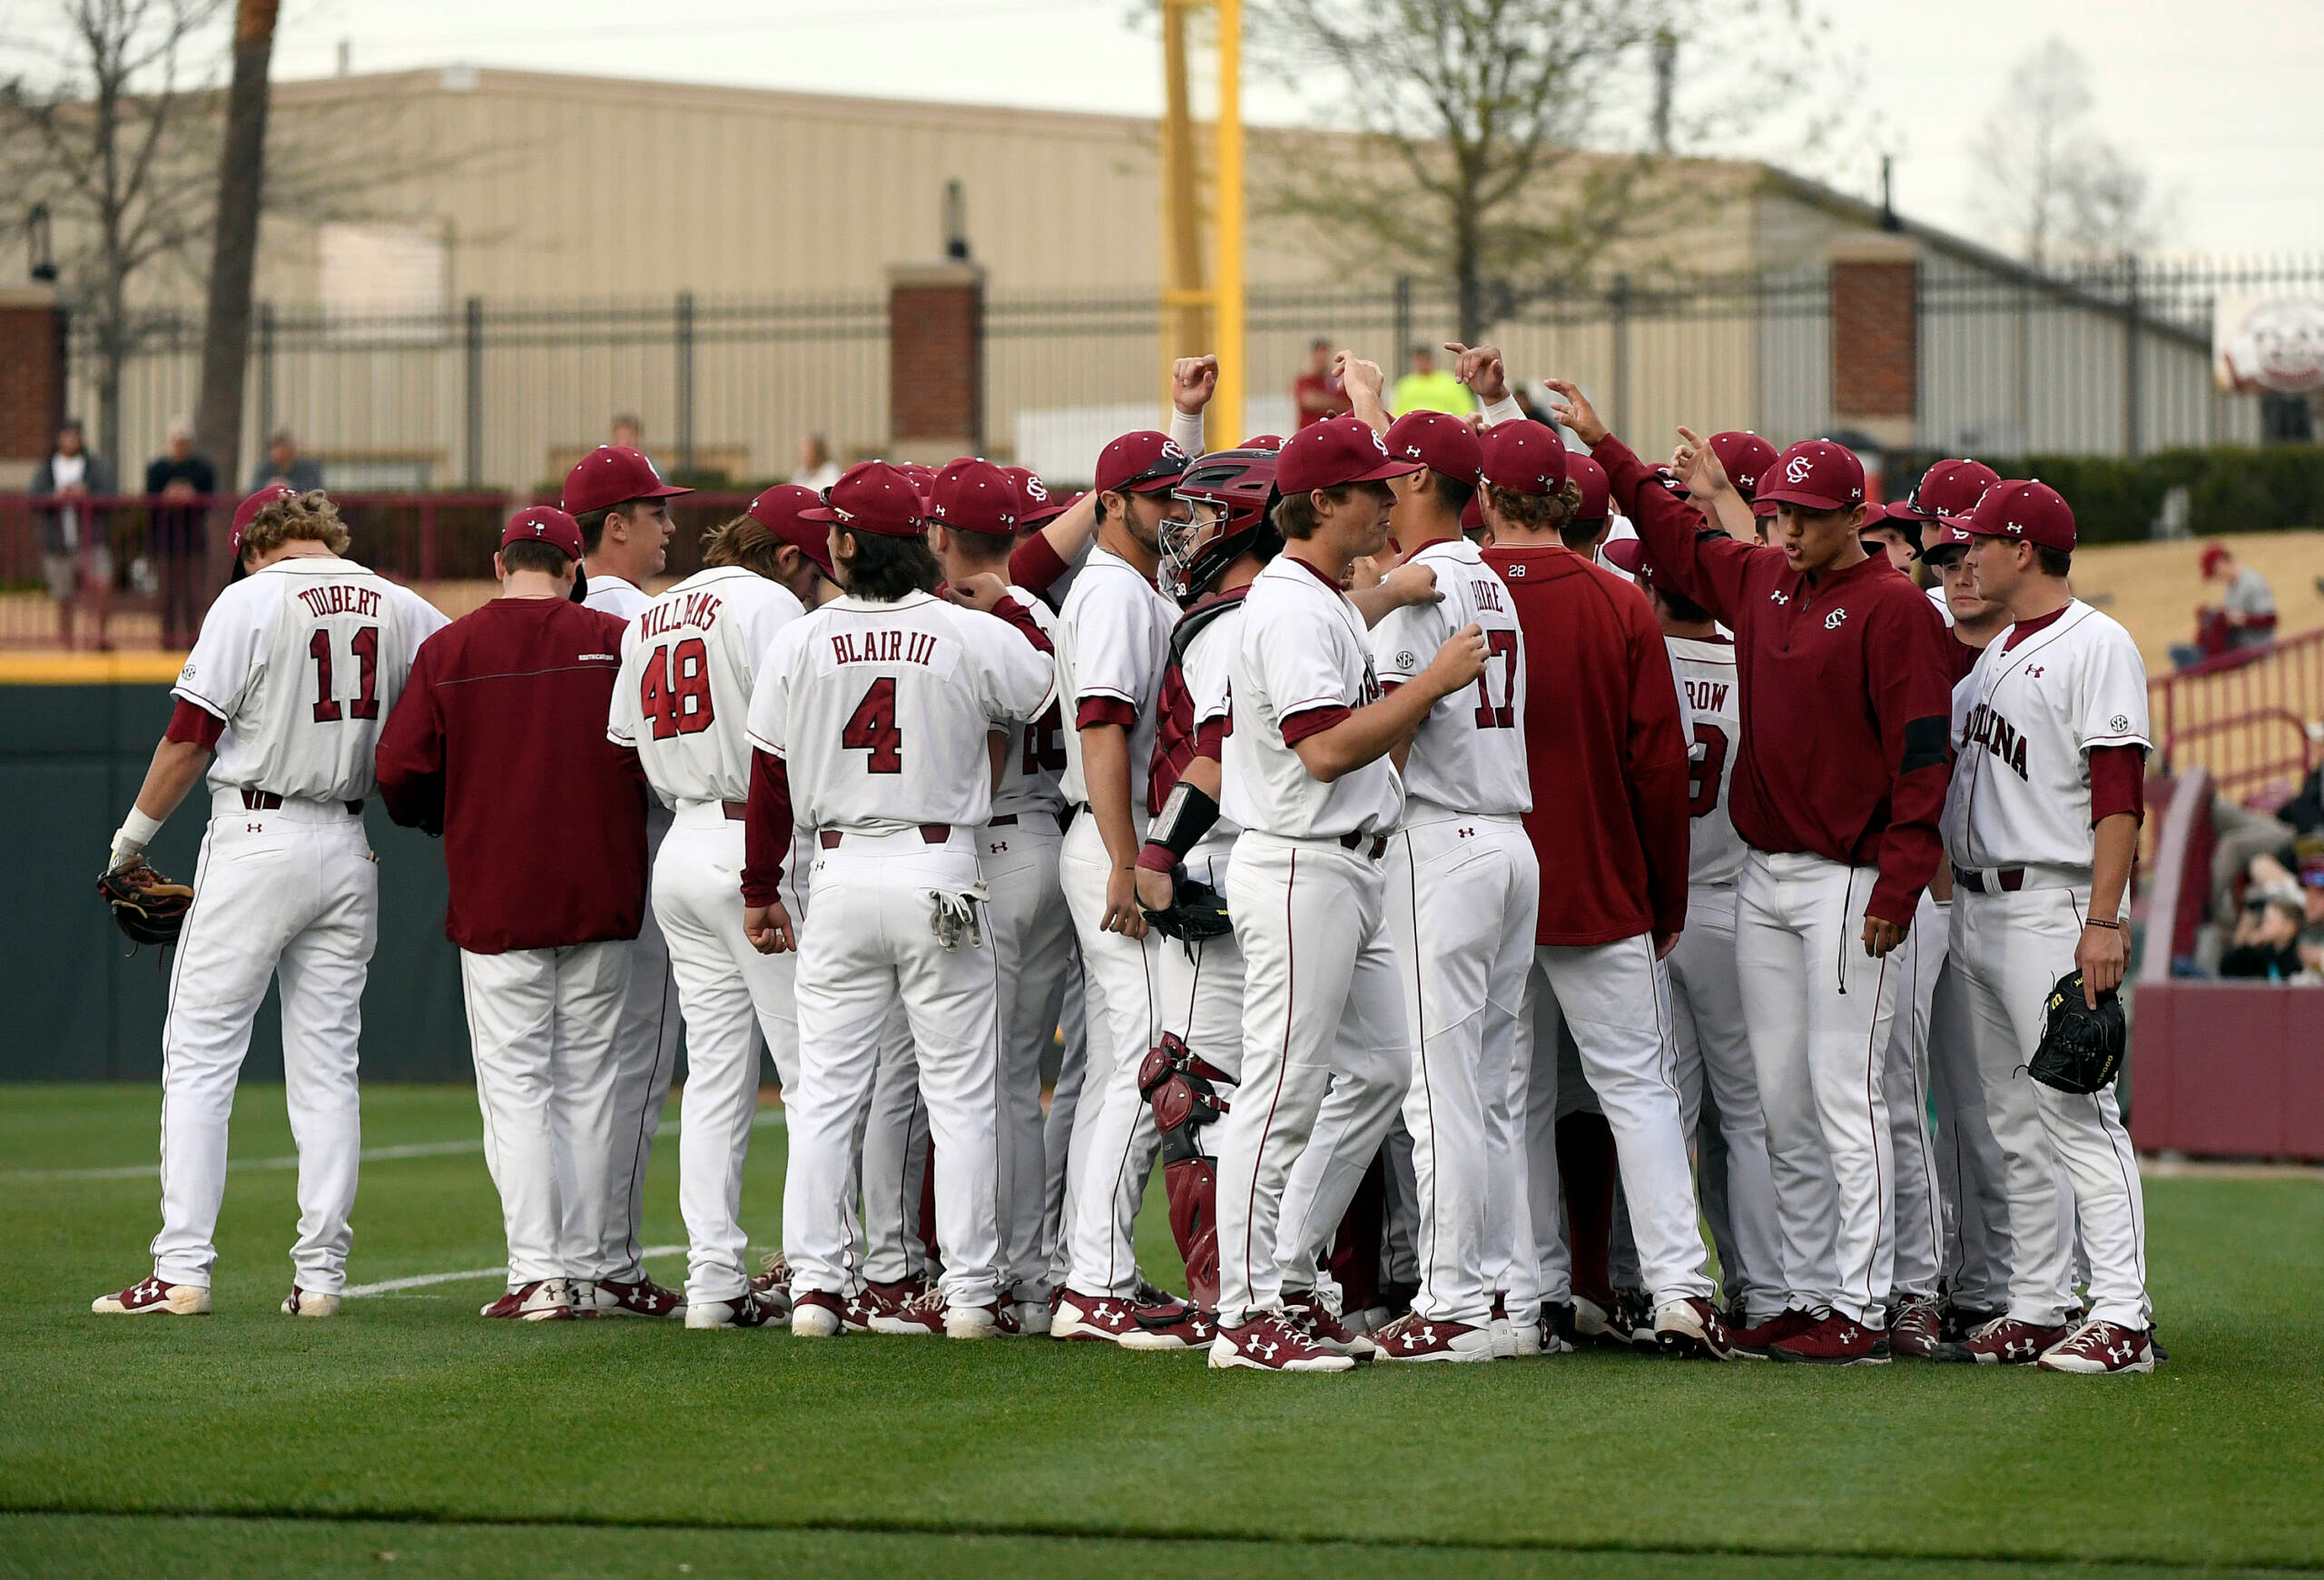 Baseball to Hold Meet & Greet With Fans at Wednesday's Basketball Game